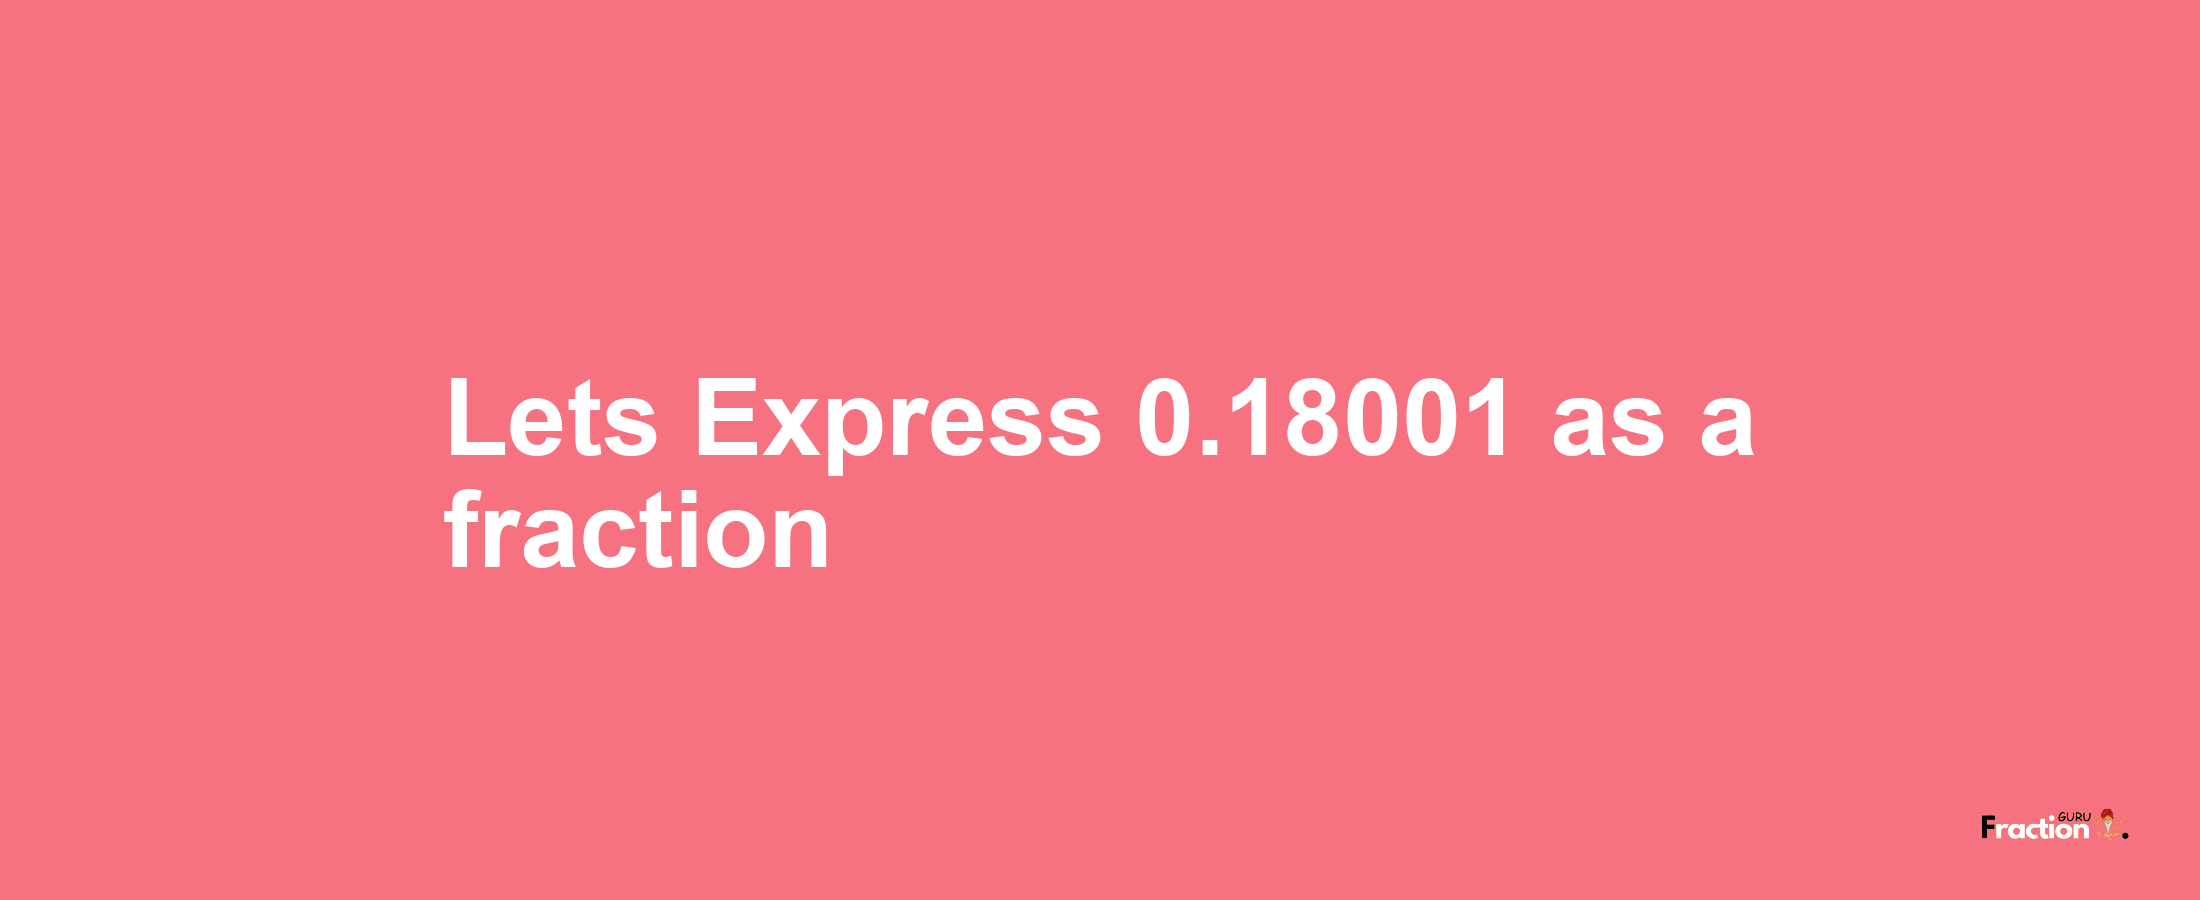 Lets Express 0.18001 as afraction